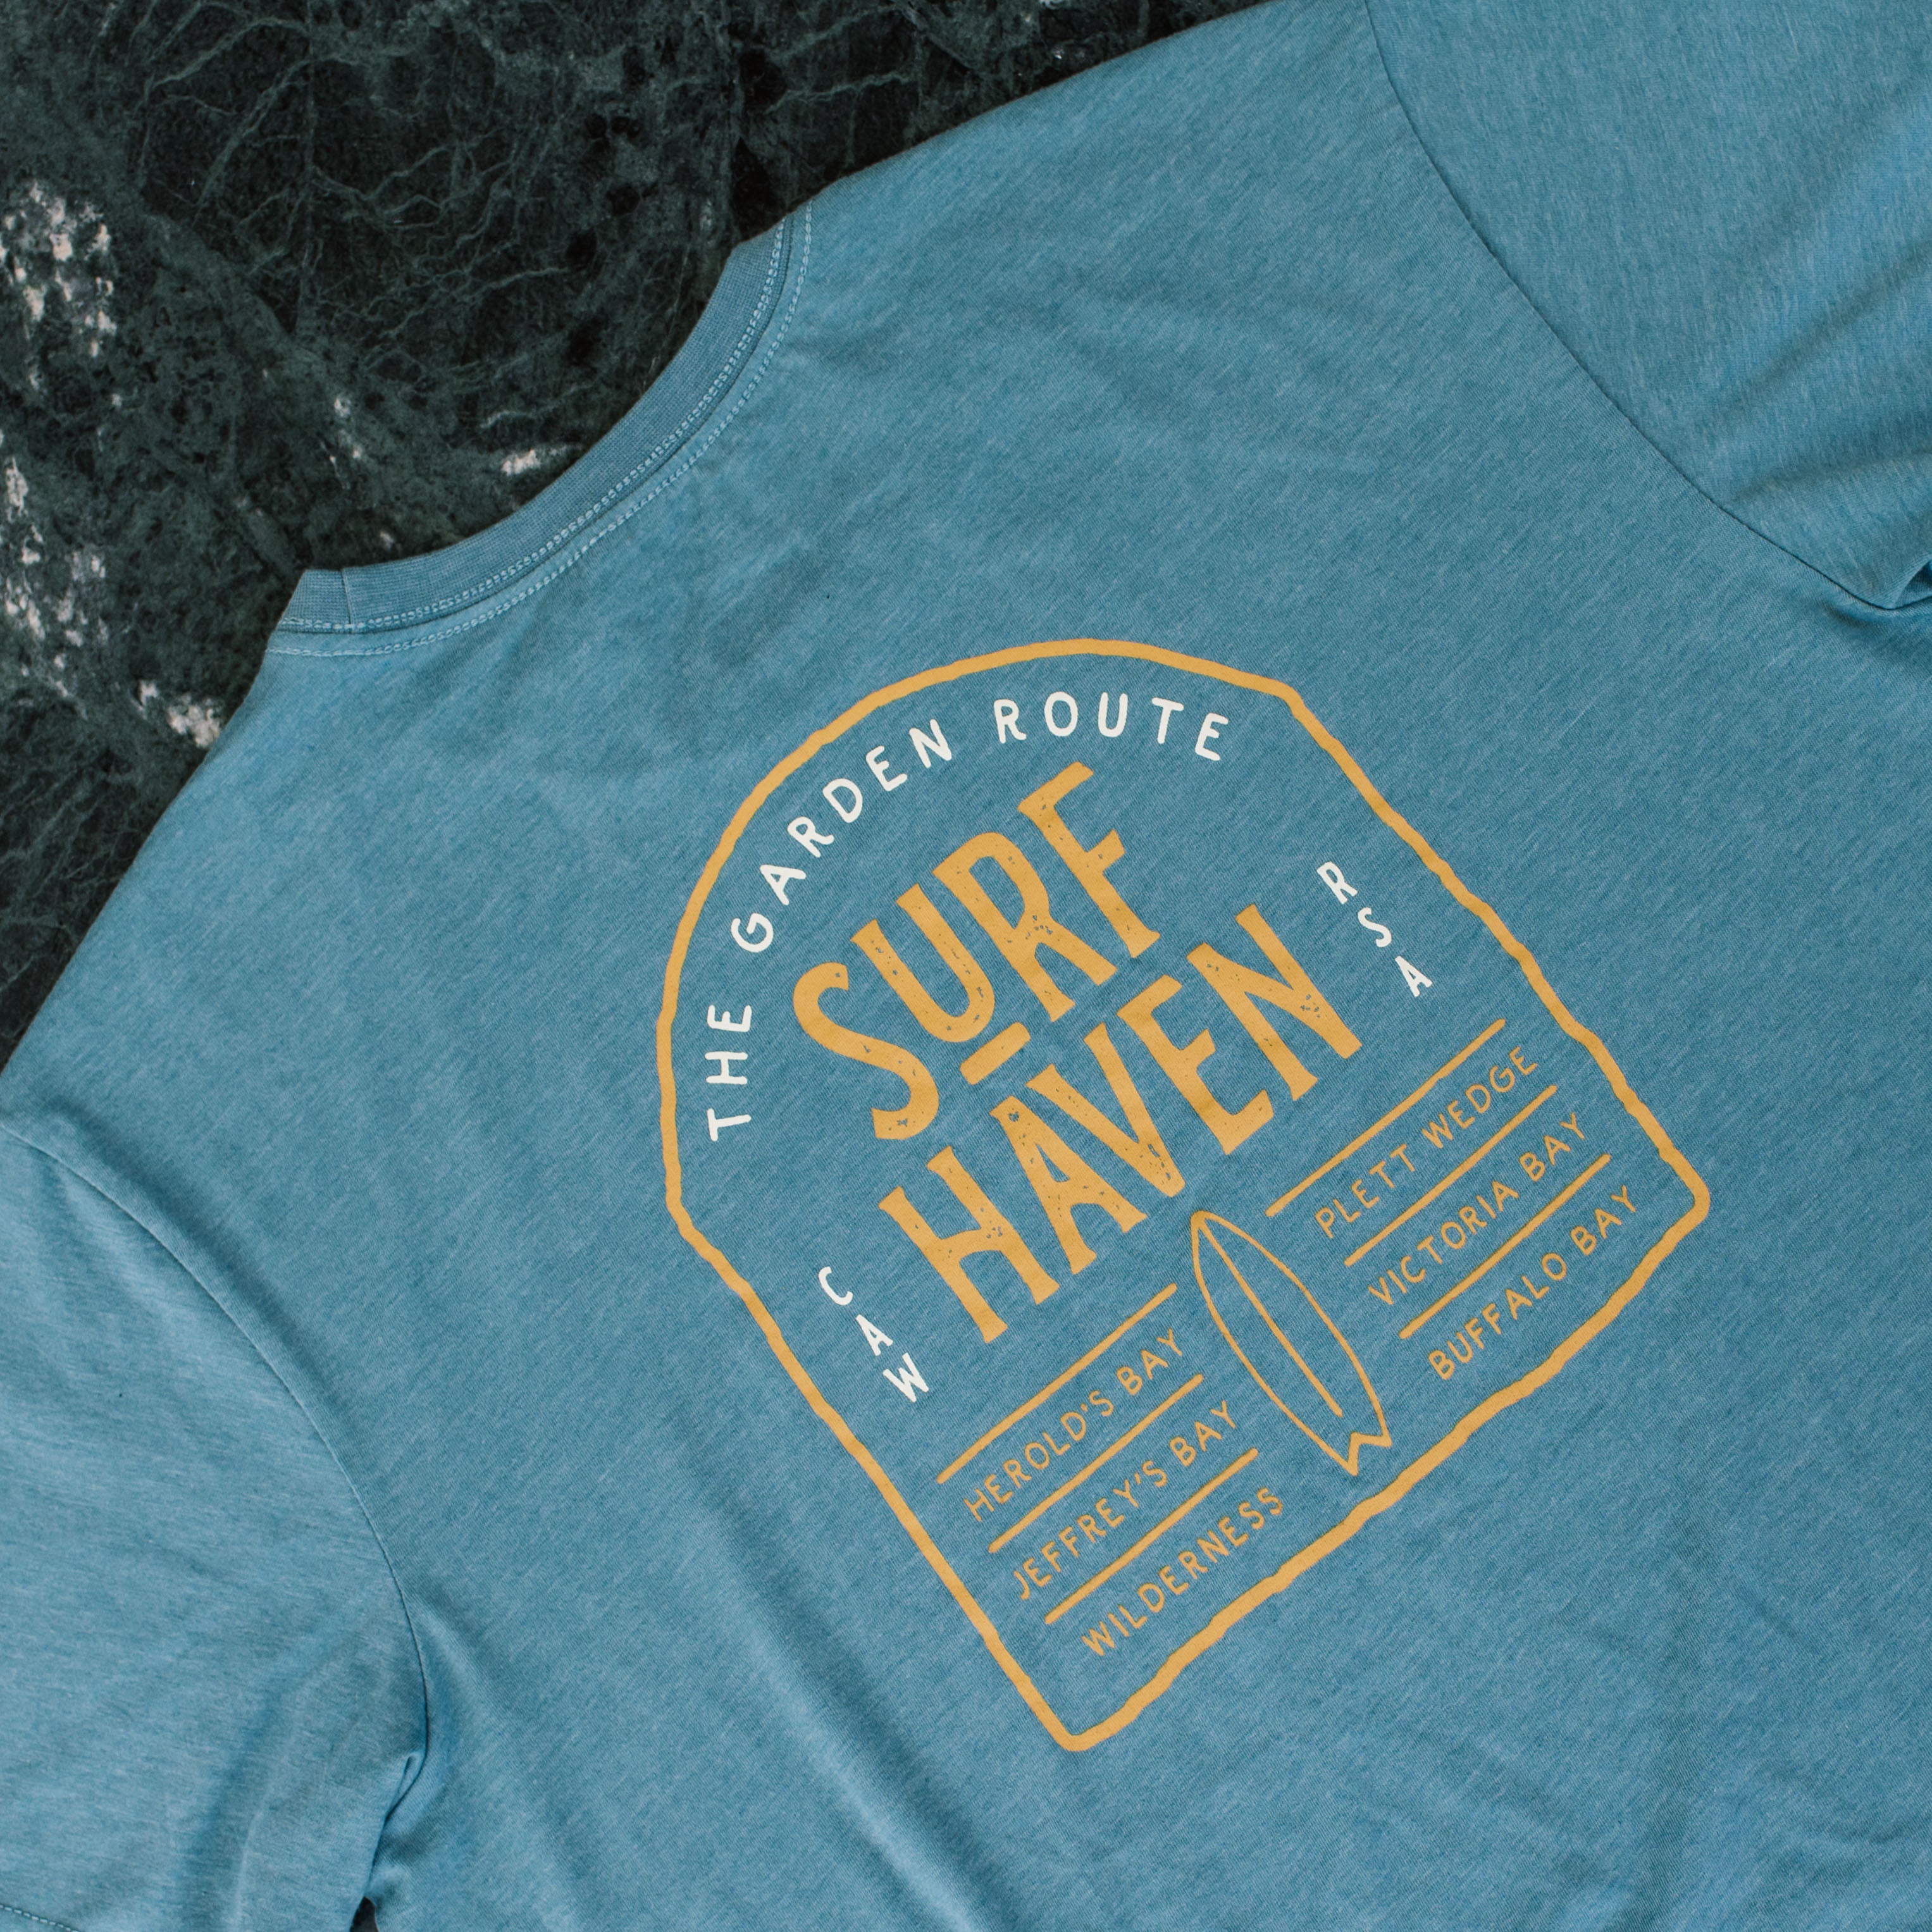 Teal Surf Haven T-Shirt - Stokedthebrand. Lifestyle products for outdoor adventures. Made in South Africa